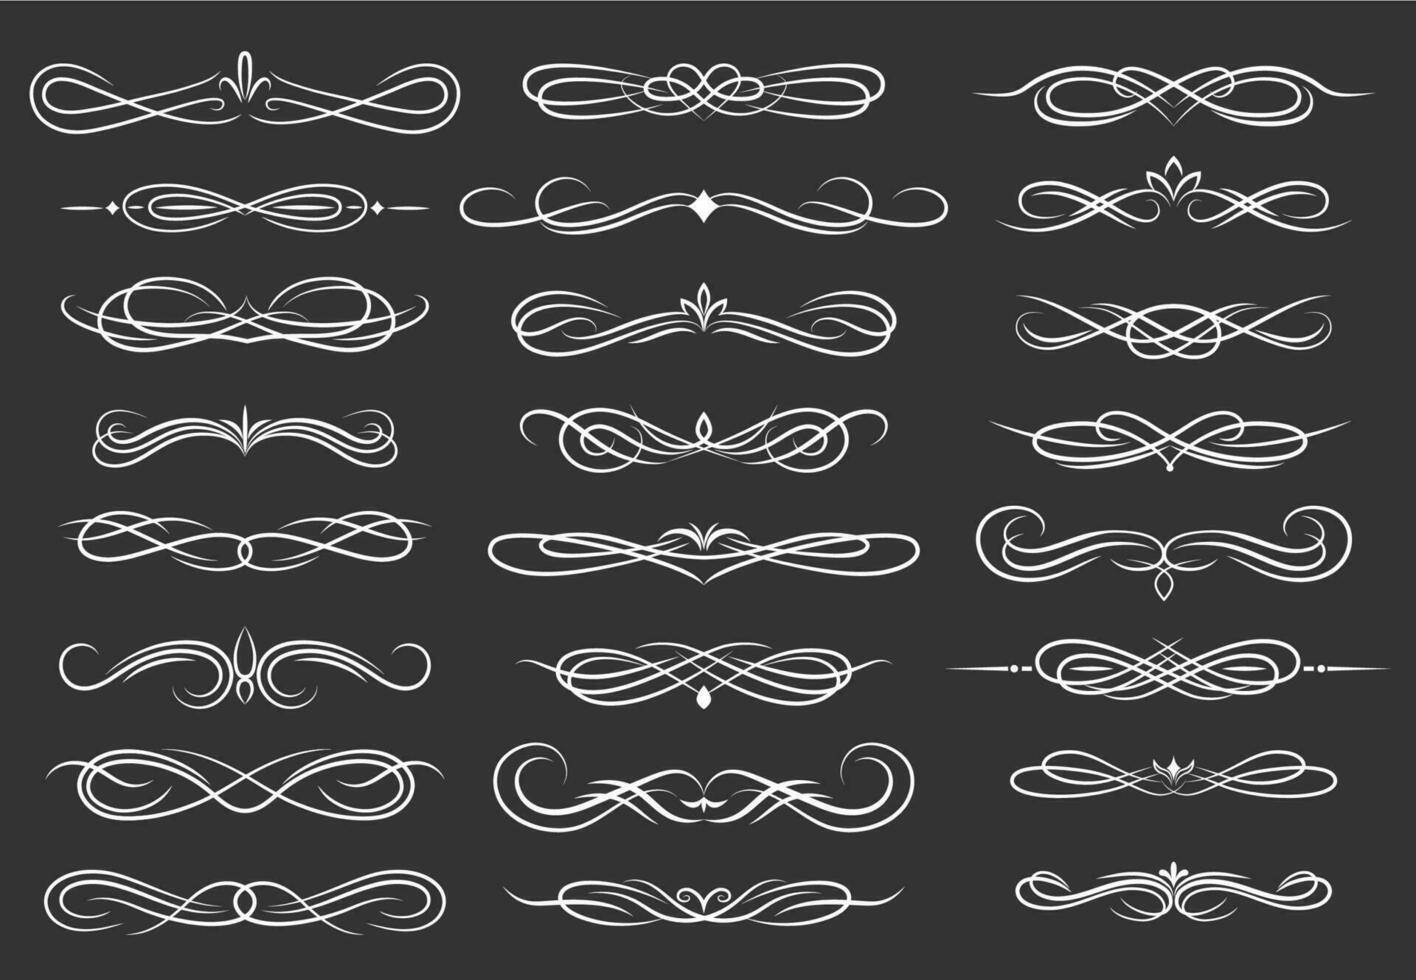 Borders decorations swirls, curly dividers set vector